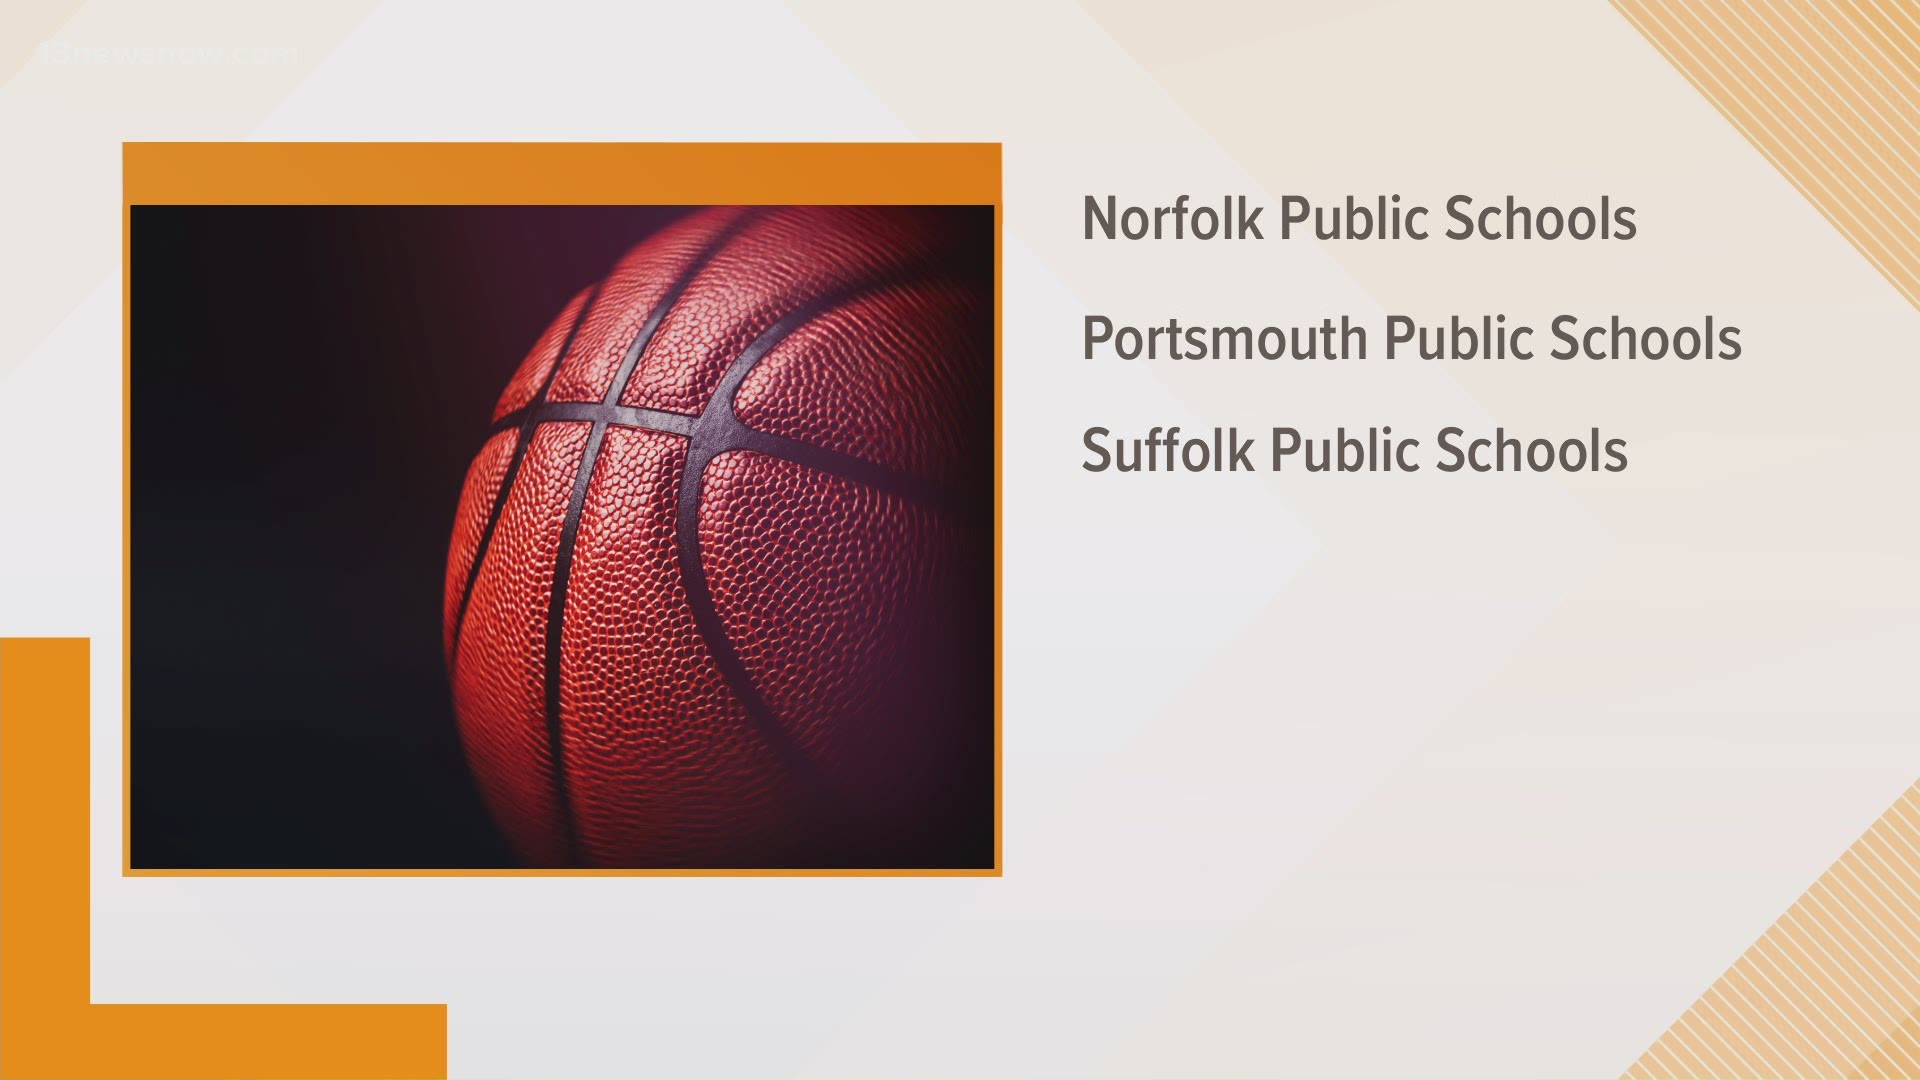 Norfolk's school administration said it looked at health metrics and other conditions before making the "difficult decision" to cancel the season.